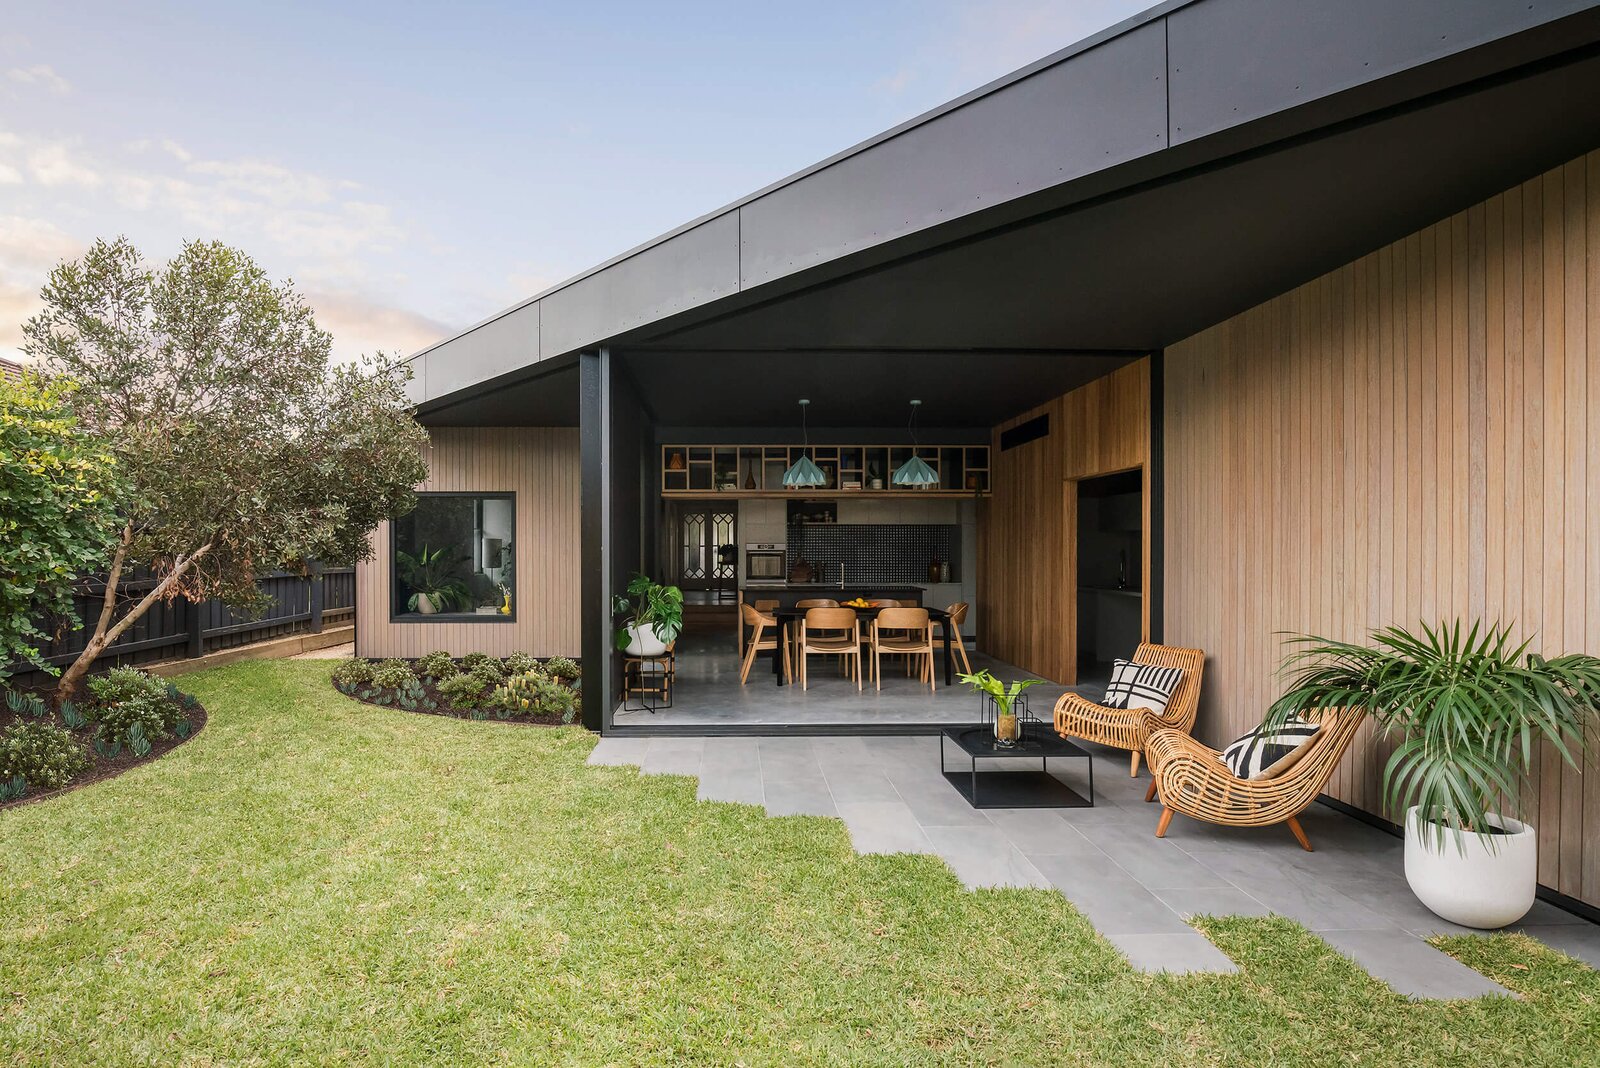 An Angled Expansion Gives a Bungalow in Melbourne an Open-Air Slant